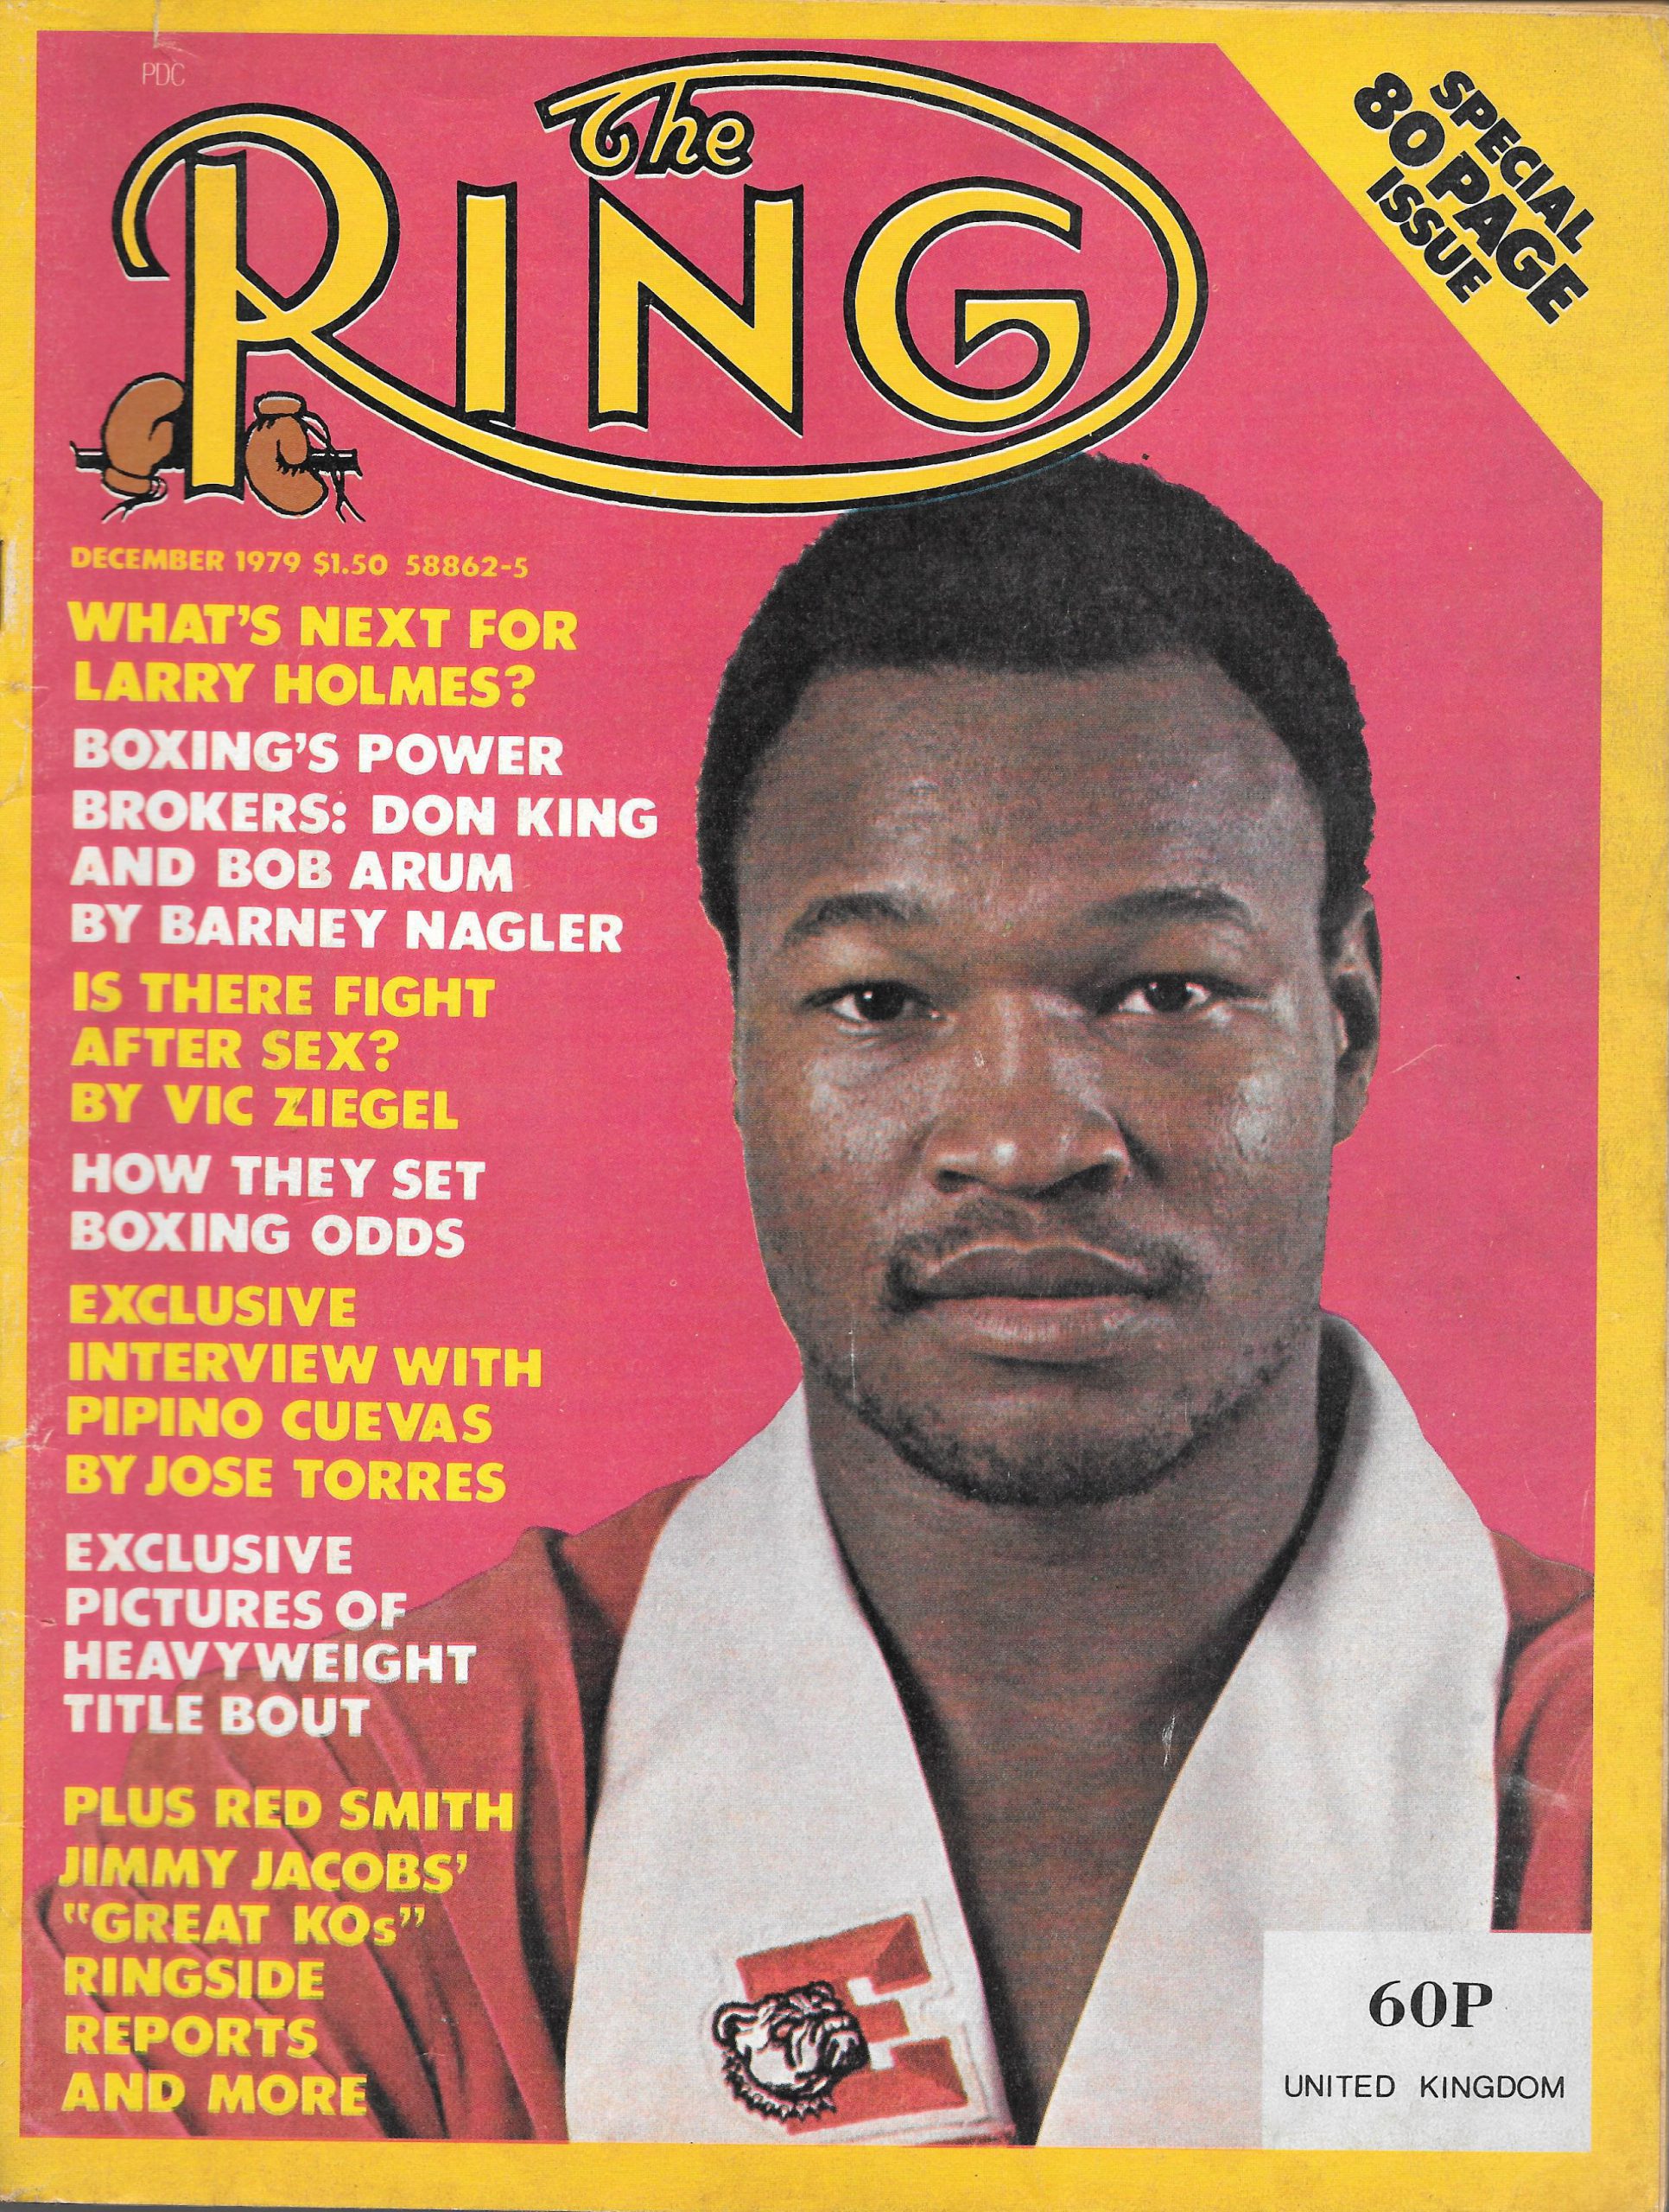 THE RING US MAGAZINE MAY 1977 EARNIE SHAVERS - Vintage Magazines